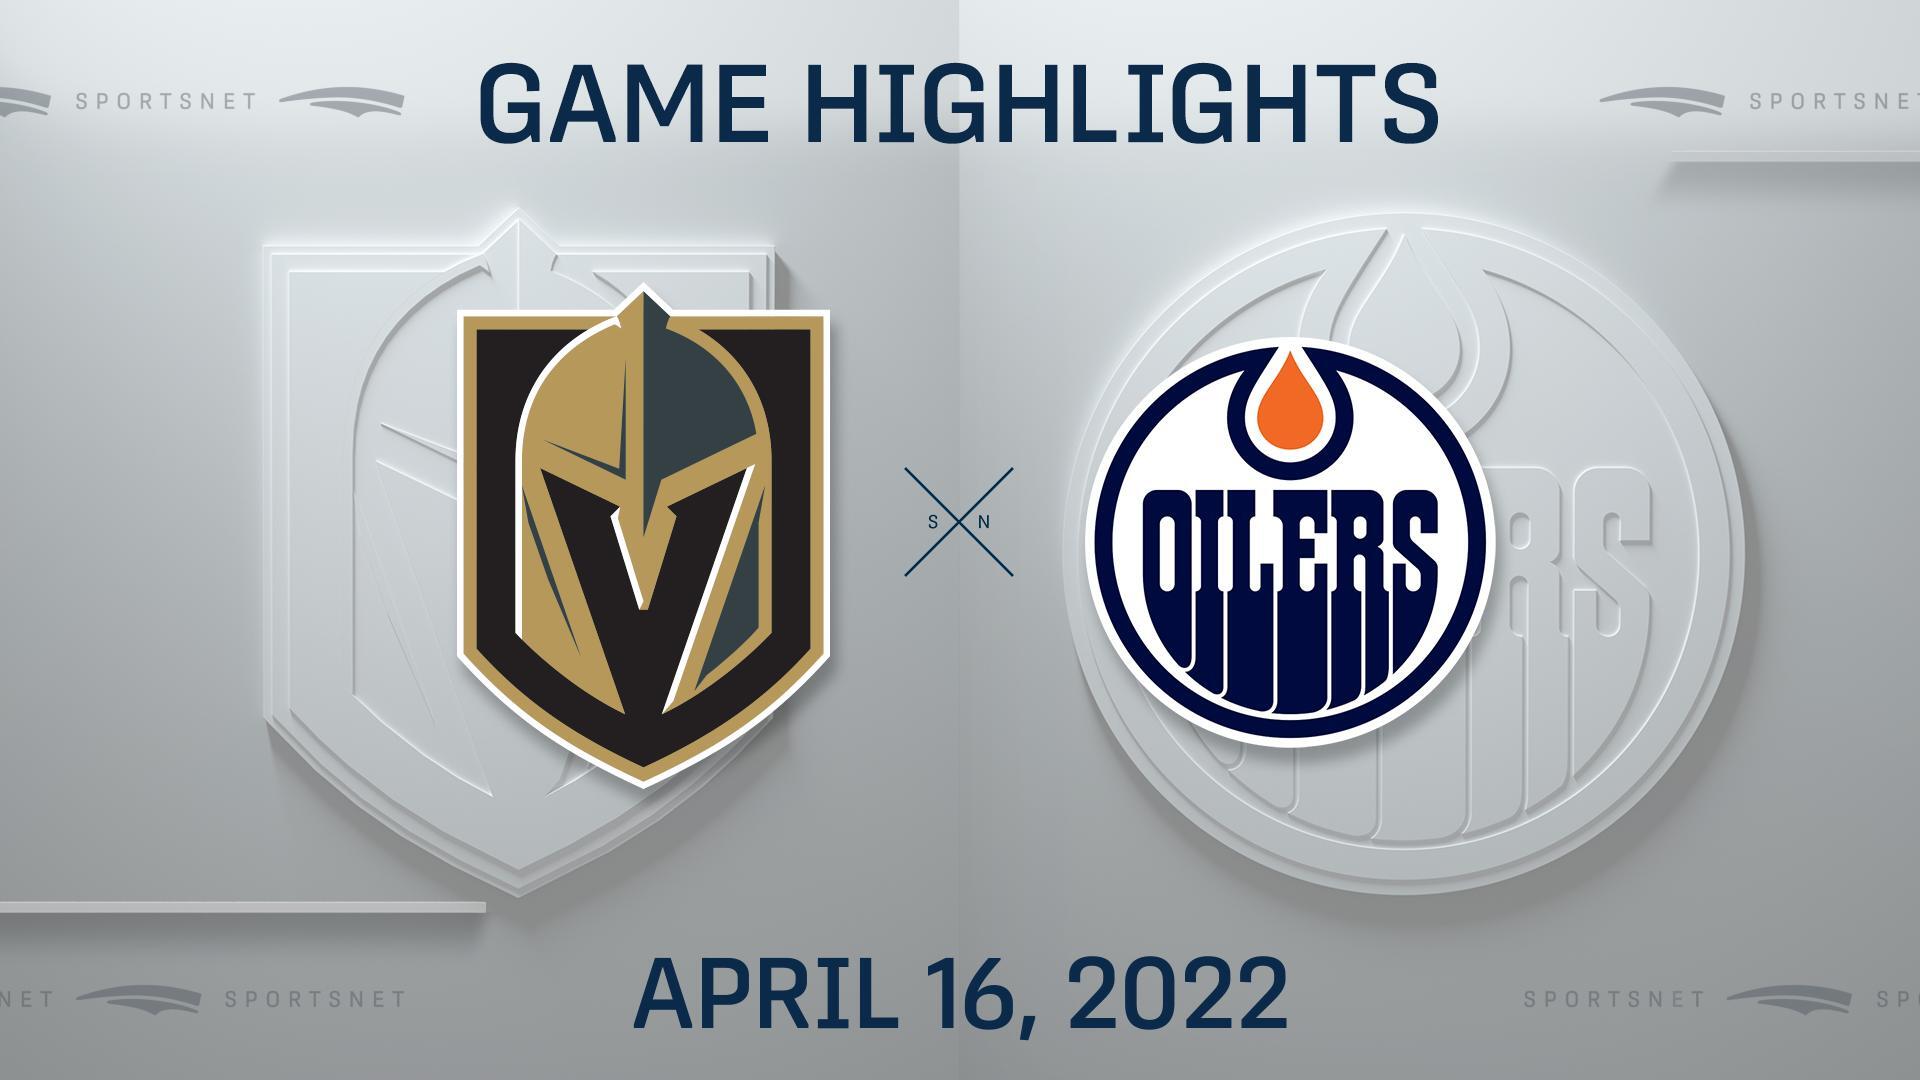 Oilers shut out Golden Knights 4-0, Smith stops all 39 shots he